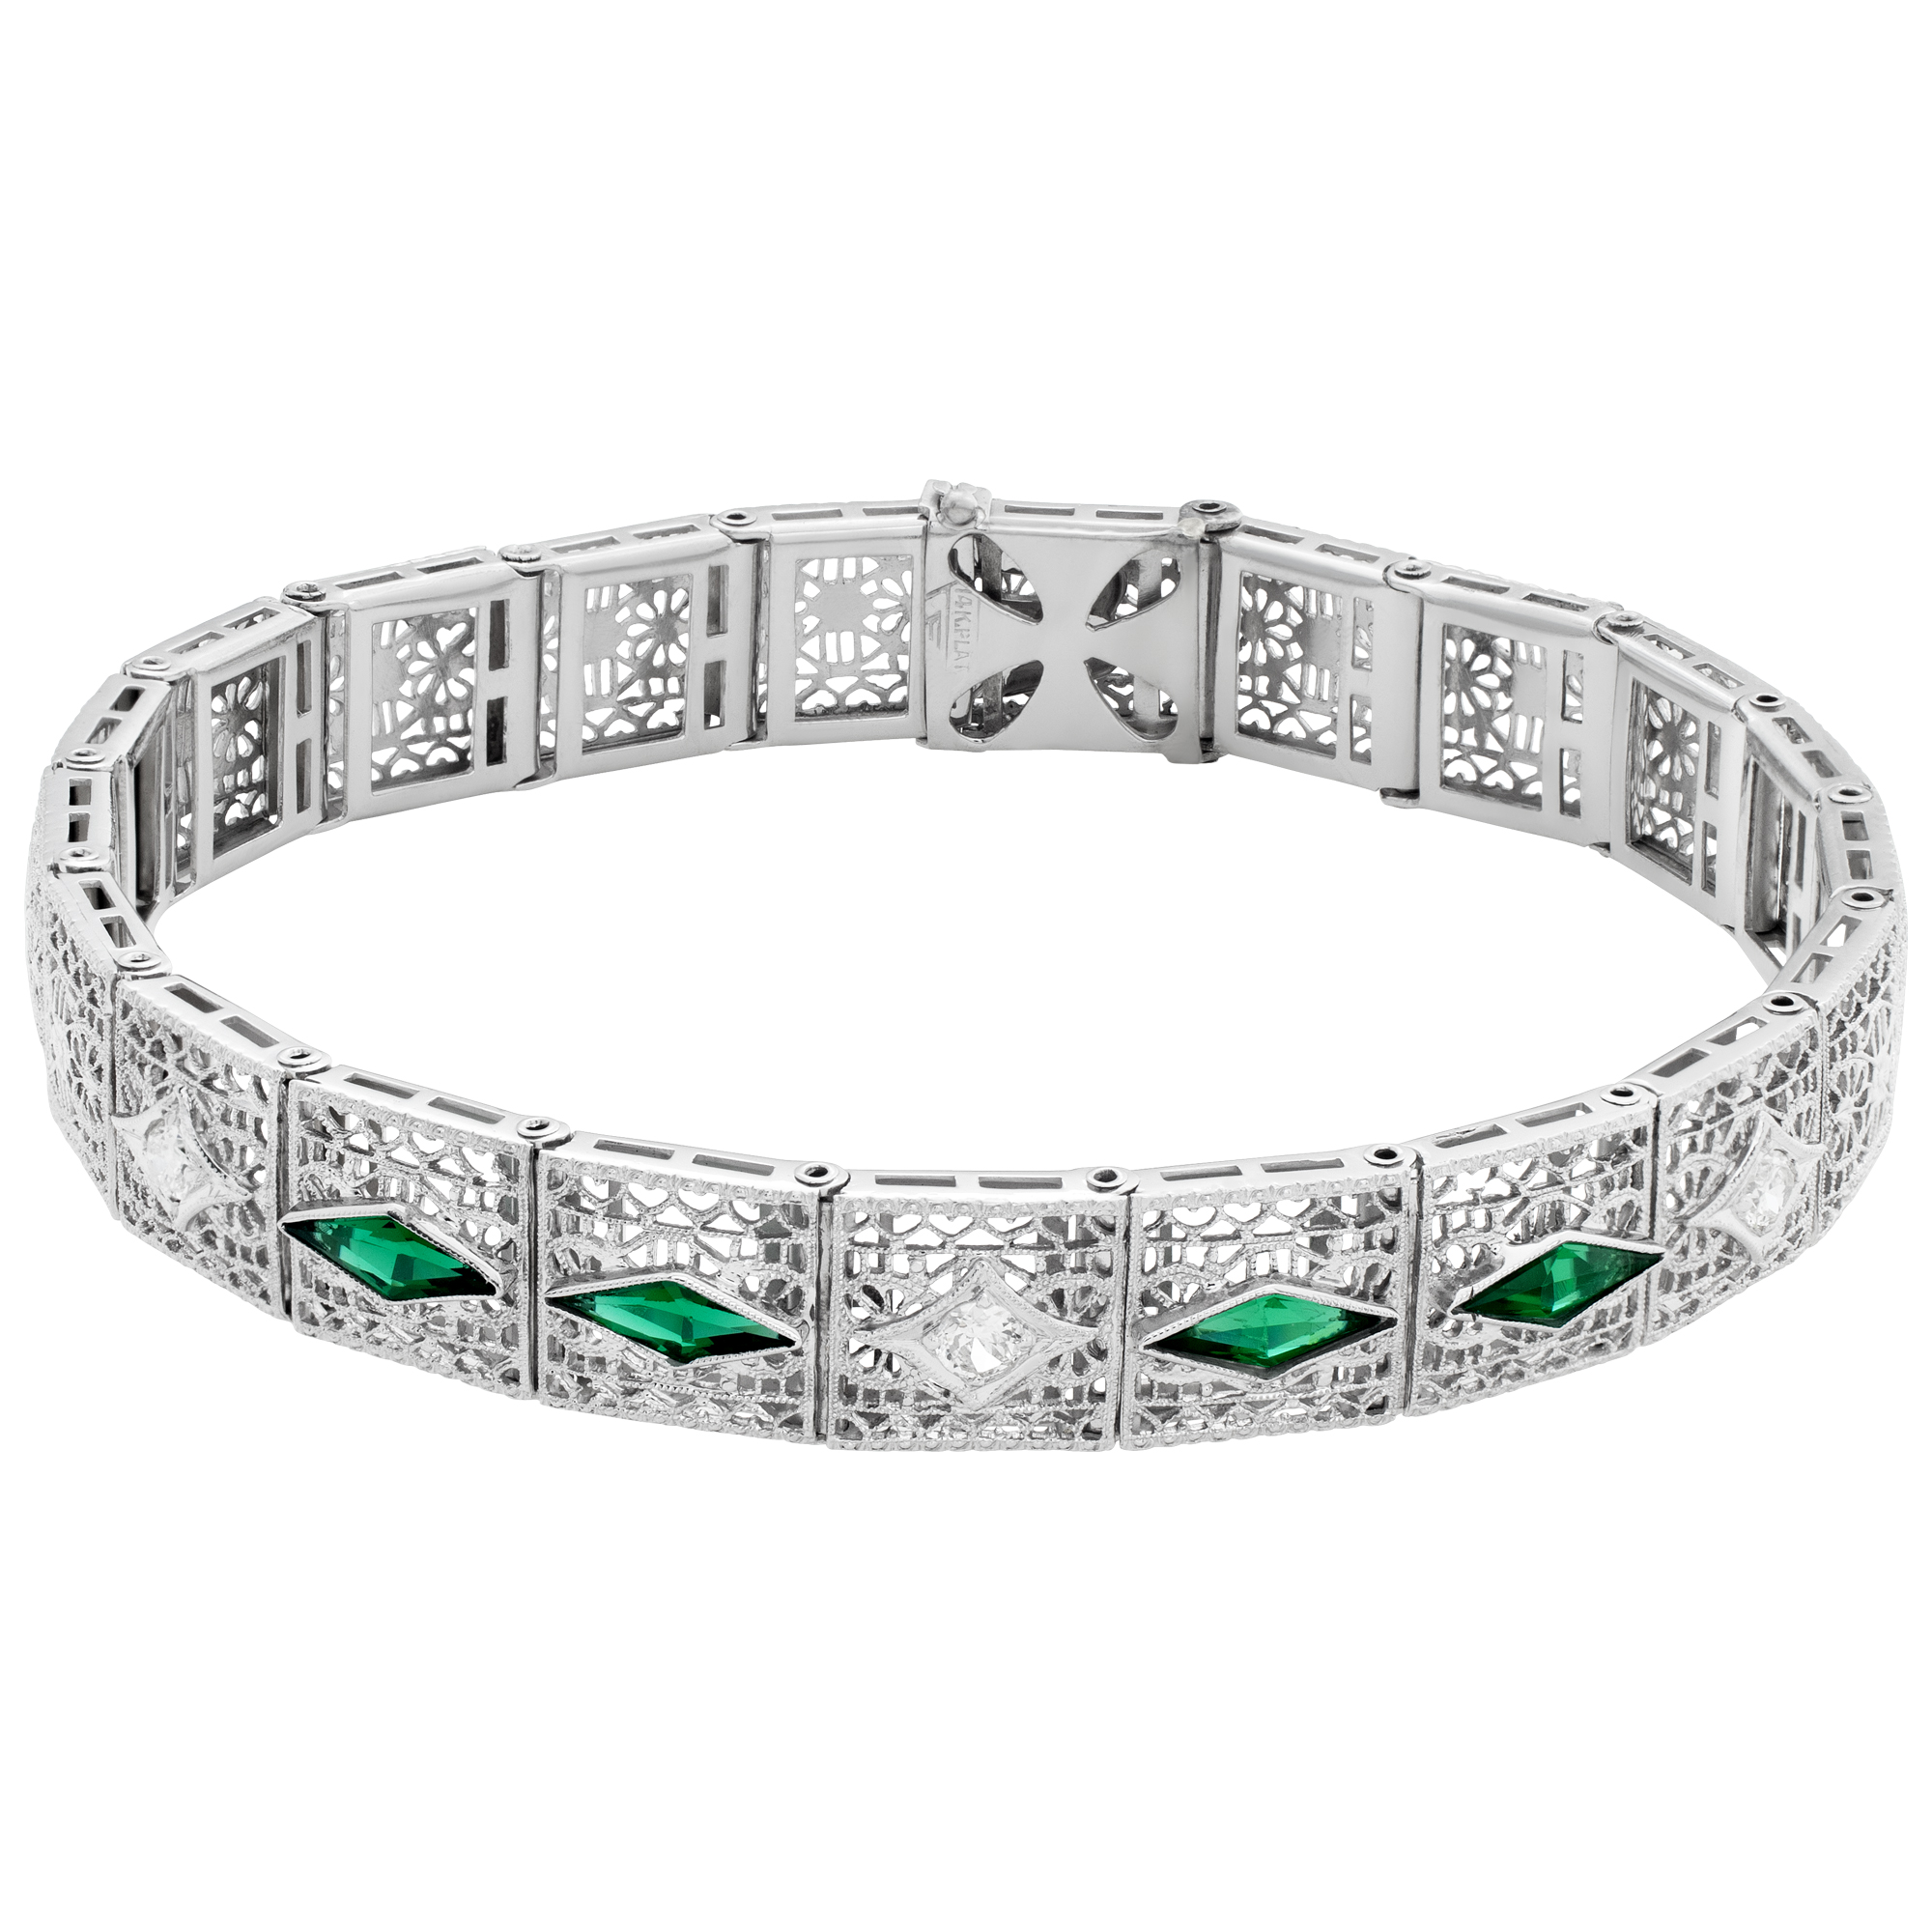 Elegant filigree line bracelet with diamonds and synthetic emeralds set in 14k white gold, with platinum top